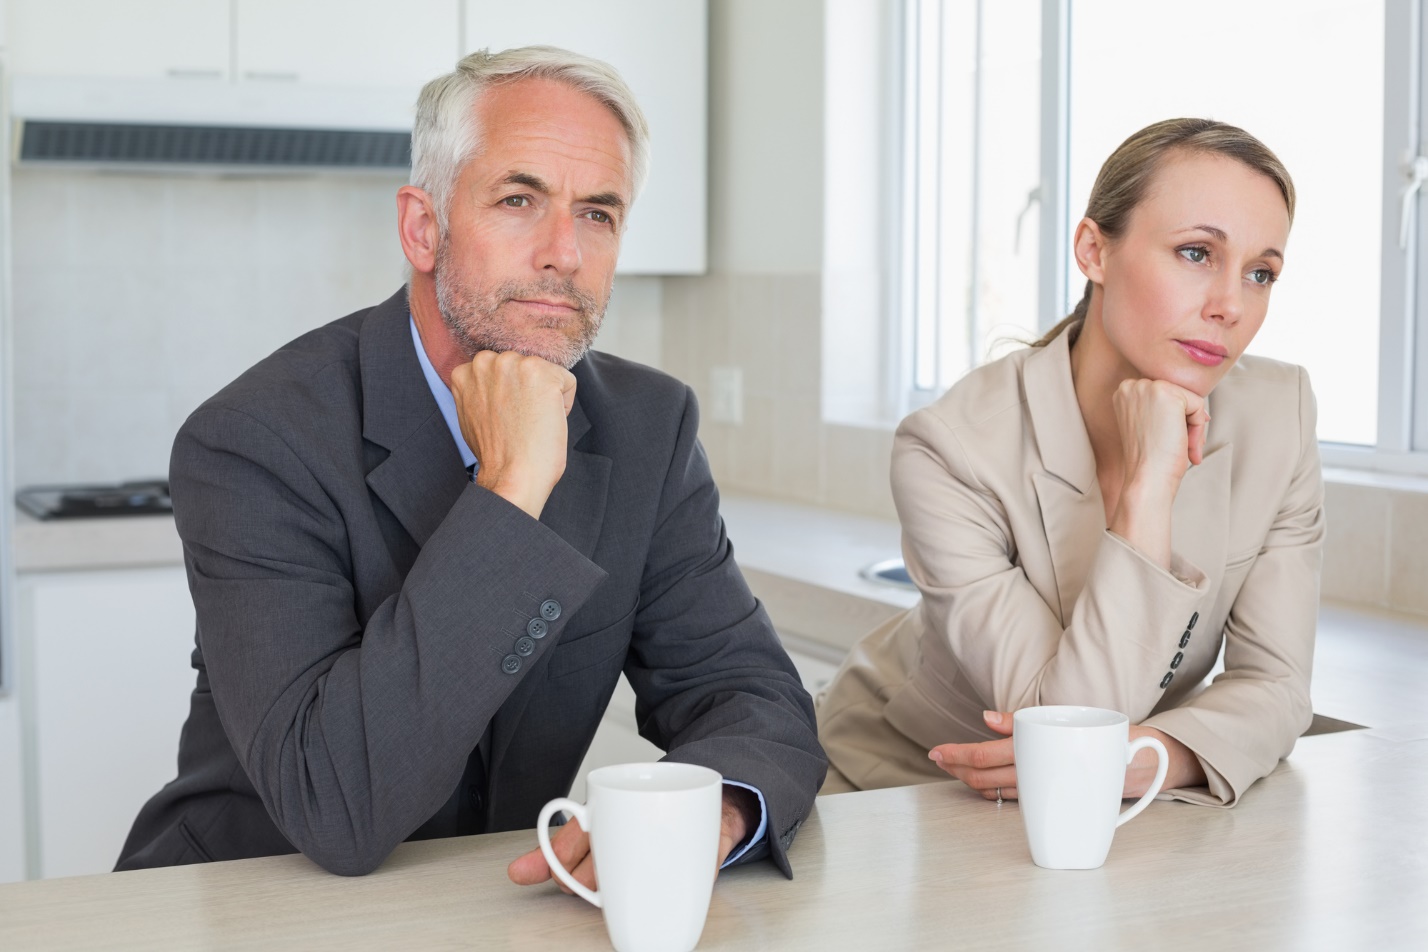 Two people sitting at a table with coffee cups

Description automatically generated with medium confidence